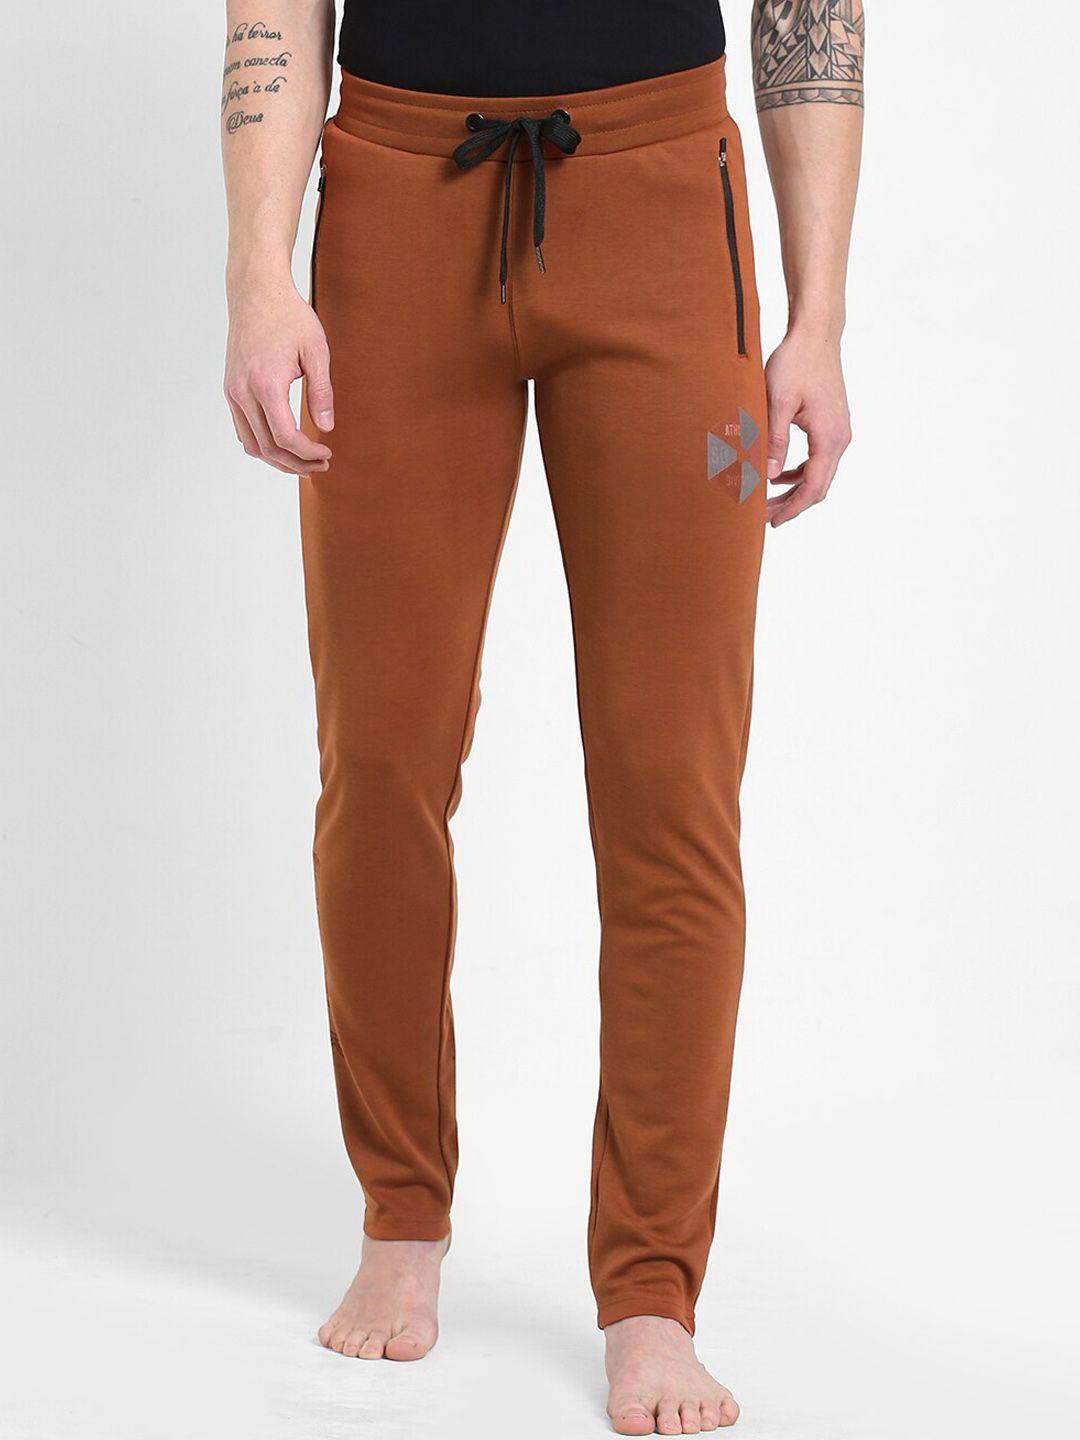 sweet dreams men brown relaxed-fit straight leg $-way stretch lounge pant